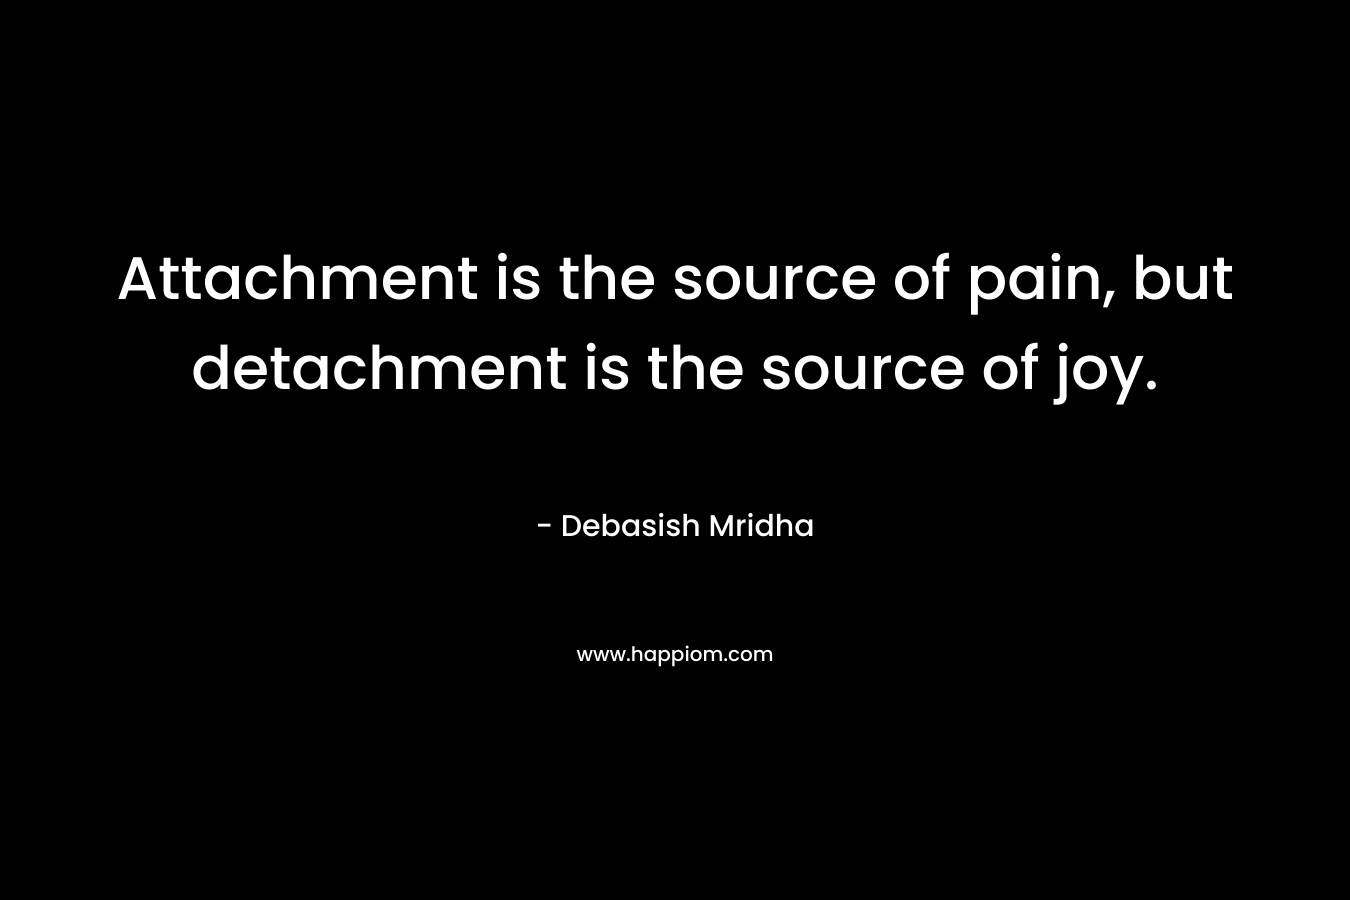 Attachment is the source of pain, but detachment is the source of joy.